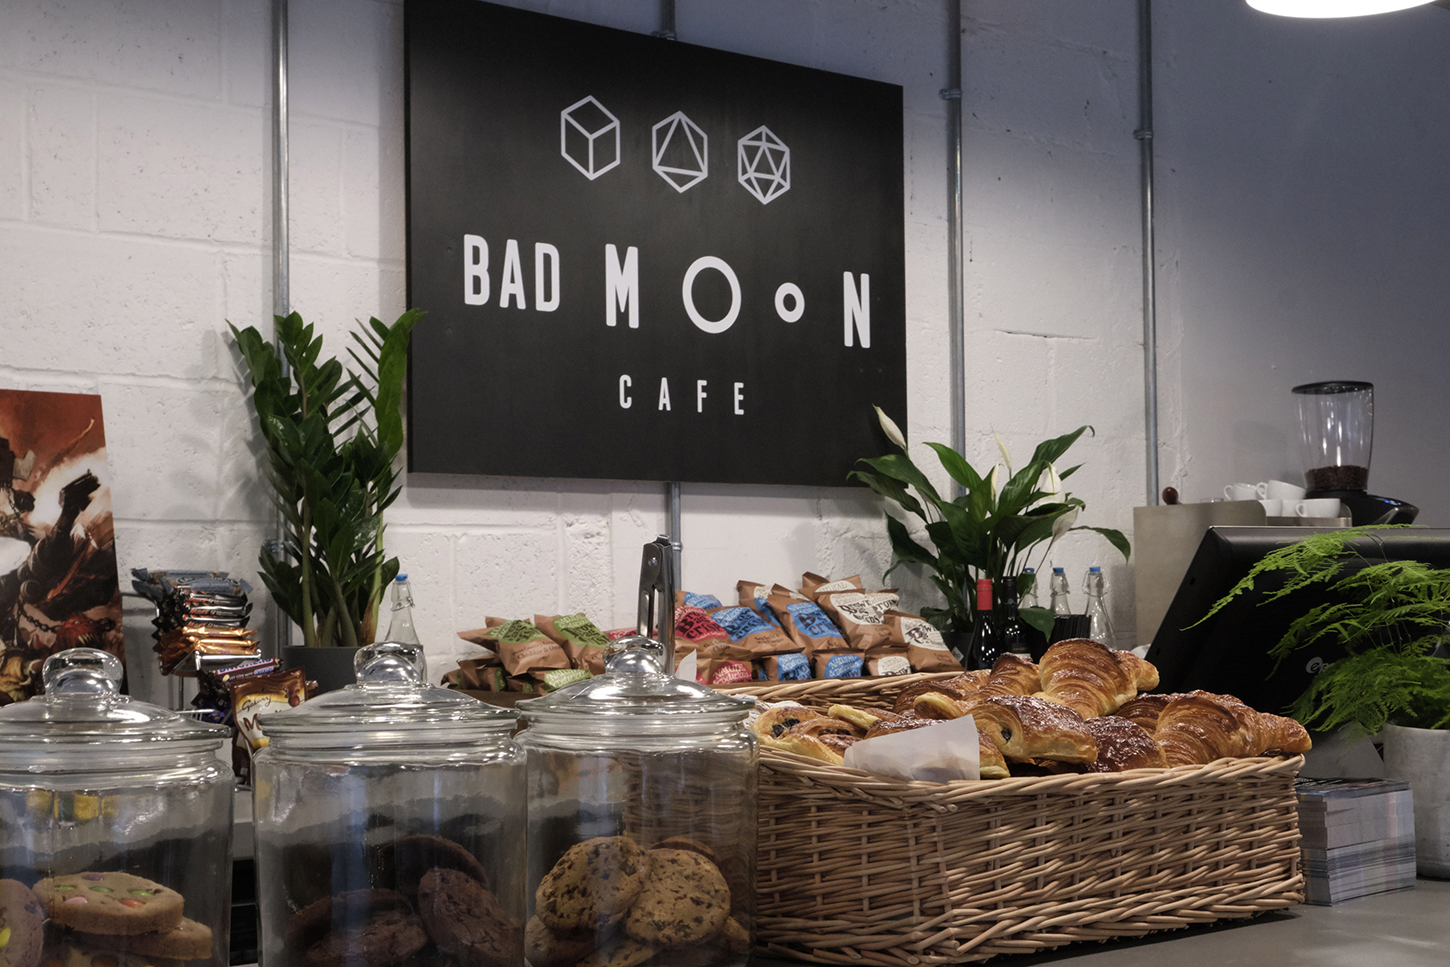 The counter at the Bad Moon Cafe, complete with a geometric sign, small plants and a basket of croissants in front.